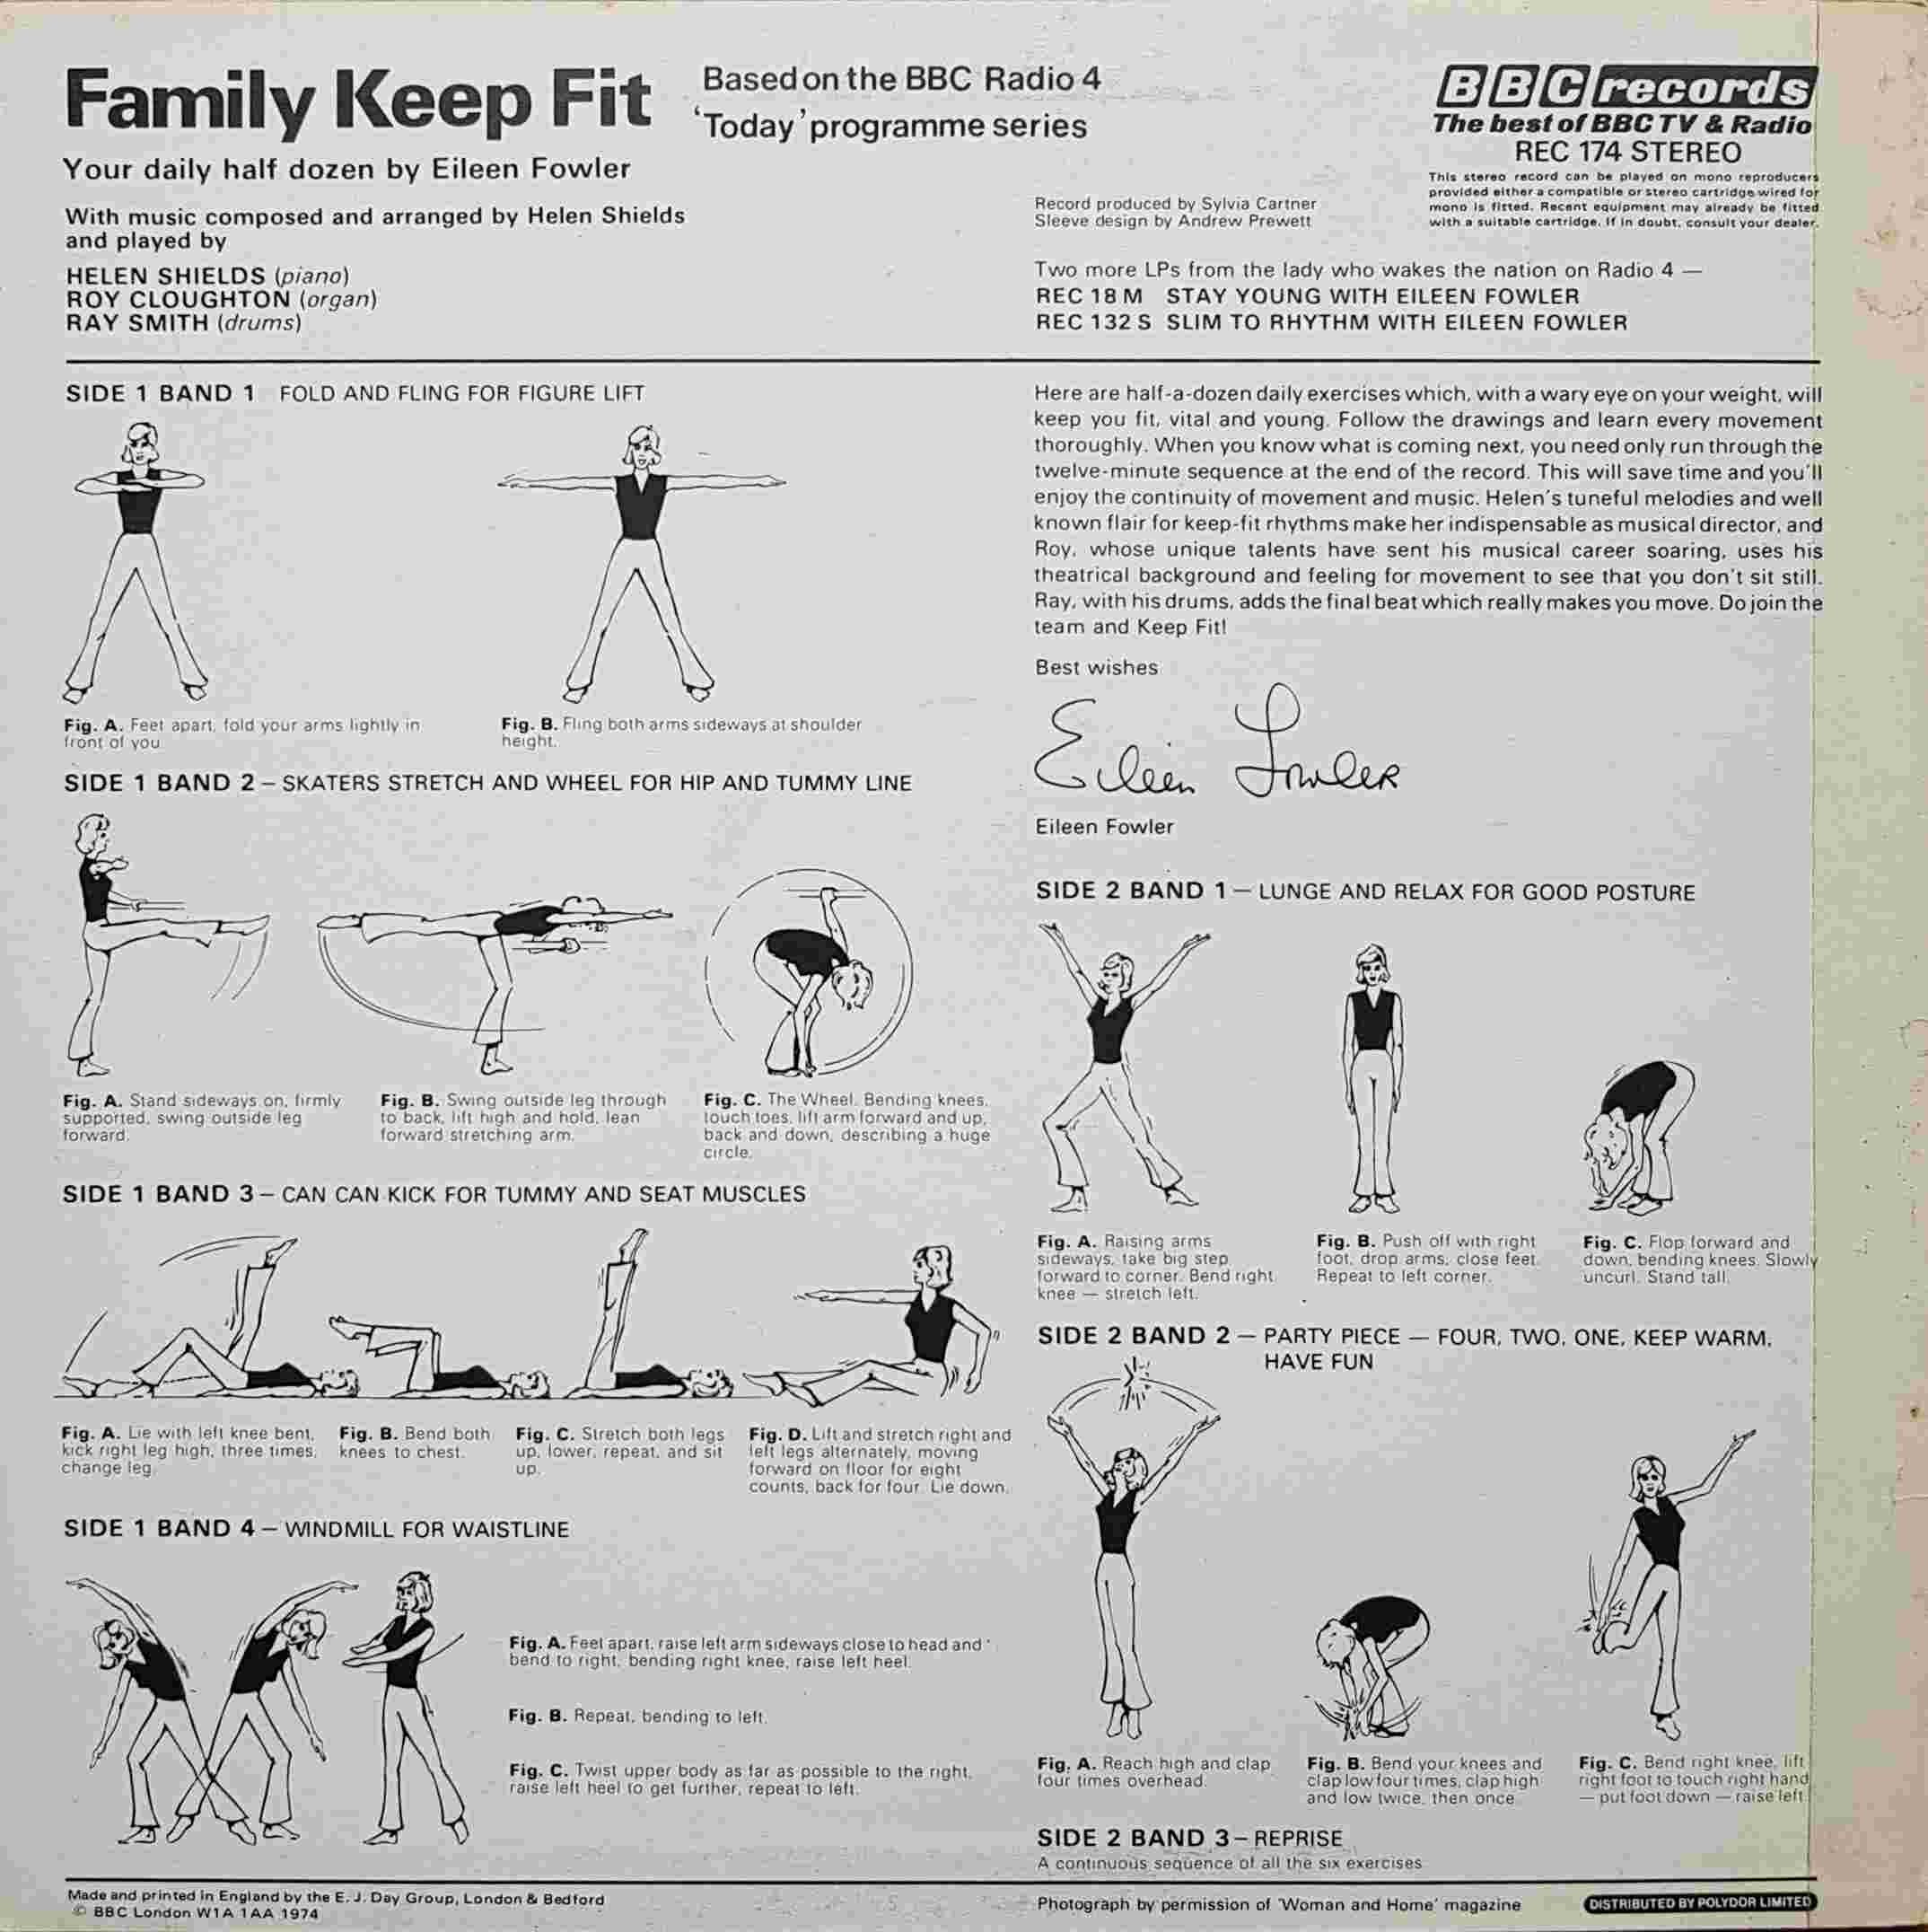 Picture of REC 174 Family keep fit by artist Eileen Fowler from the BBC records and Tapes library